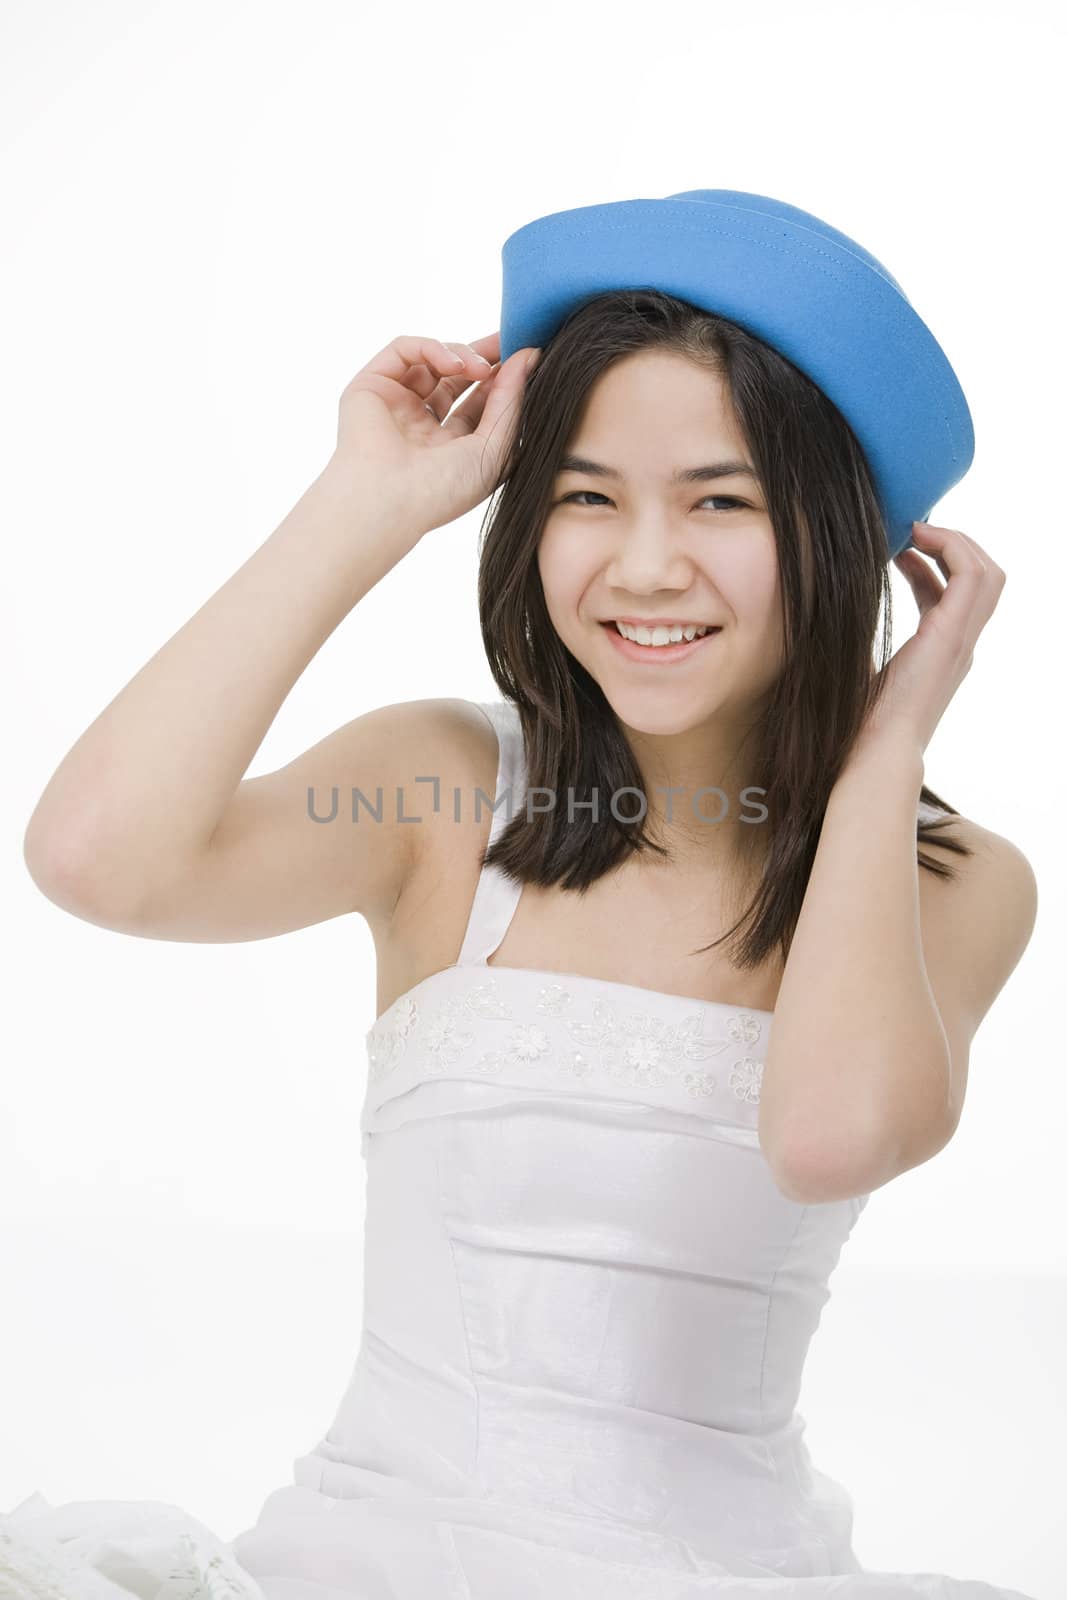 Beautiful young teen girl in blue hat and white dress, smiling. Isolated on white